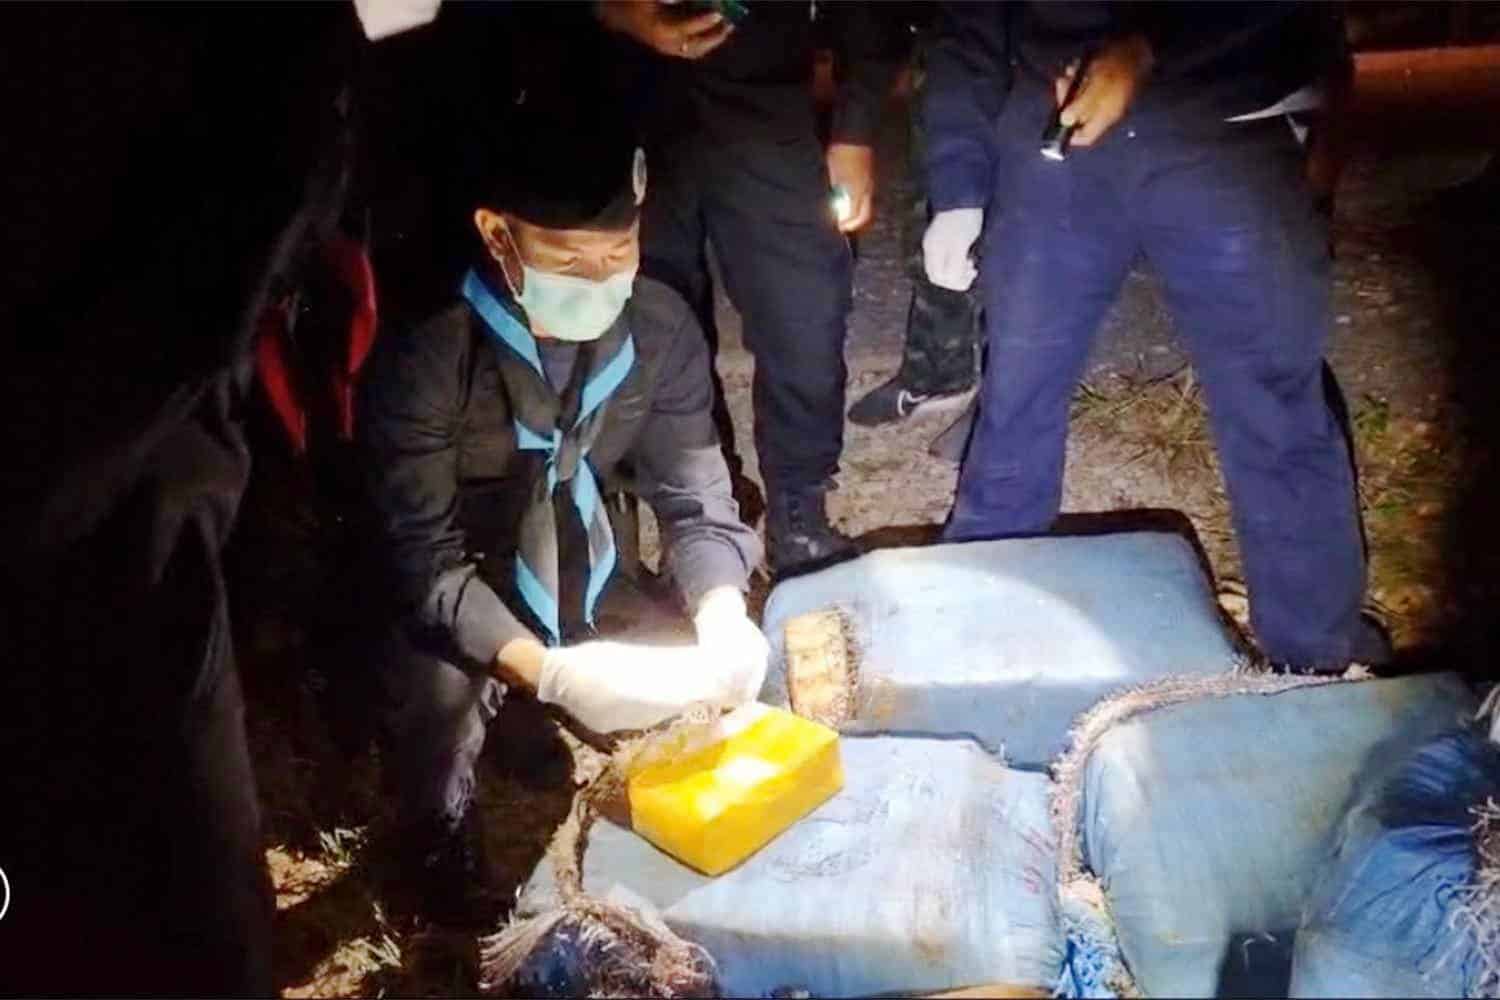 Soldiers in Chiang Rai Seize 3 Million Meth Pills, 2 Men Arrested